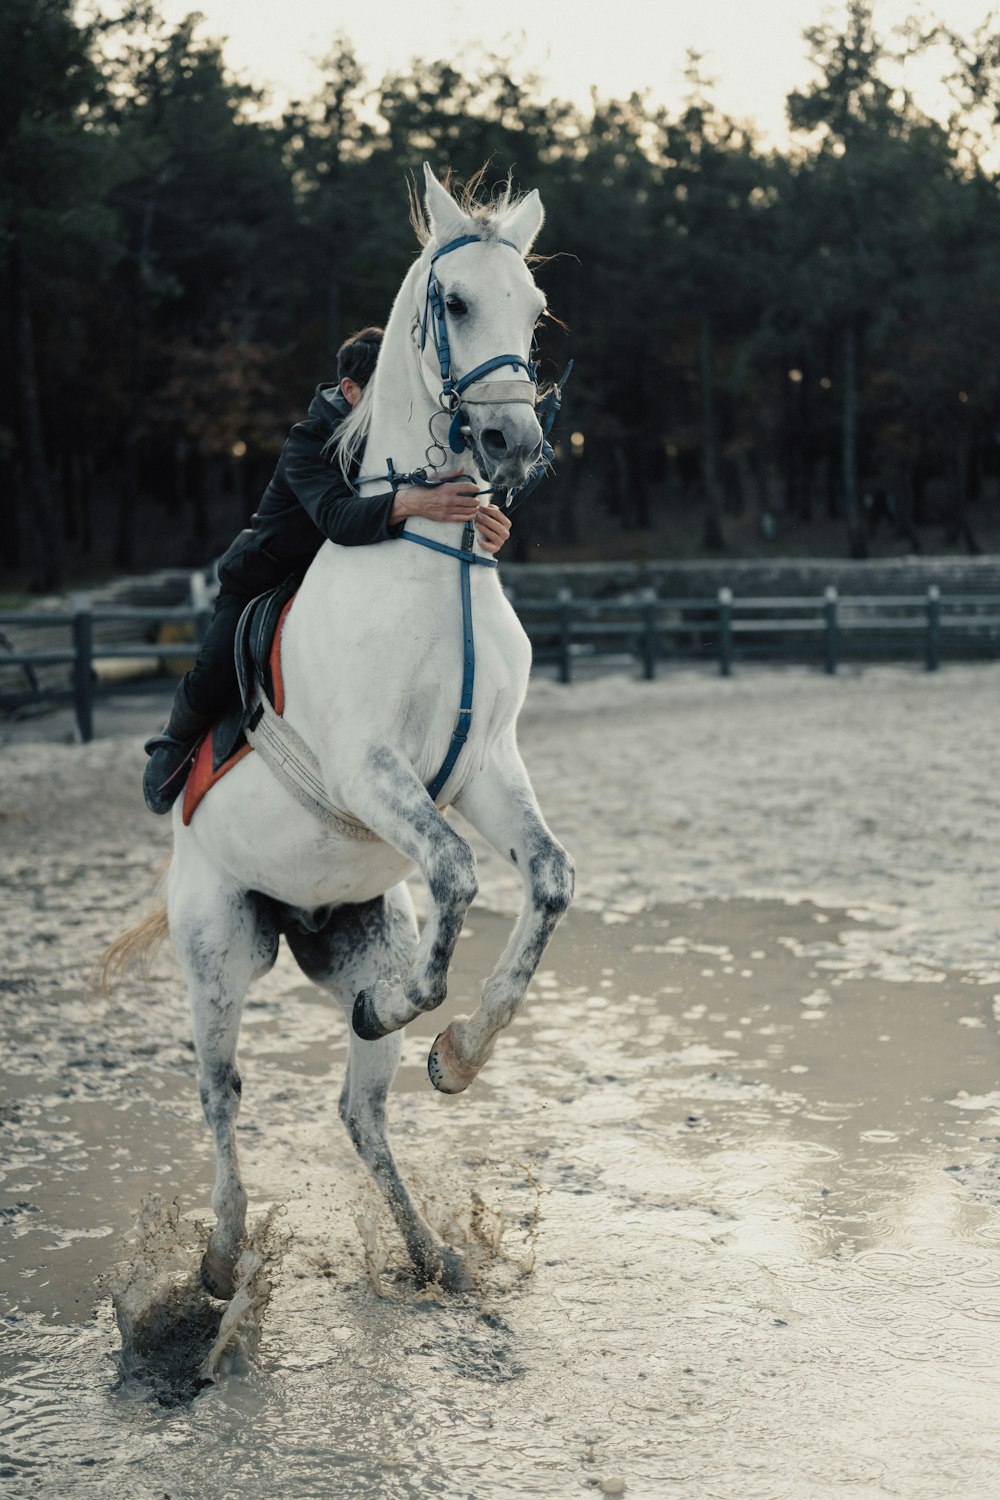 a person riding on the back of a white horse